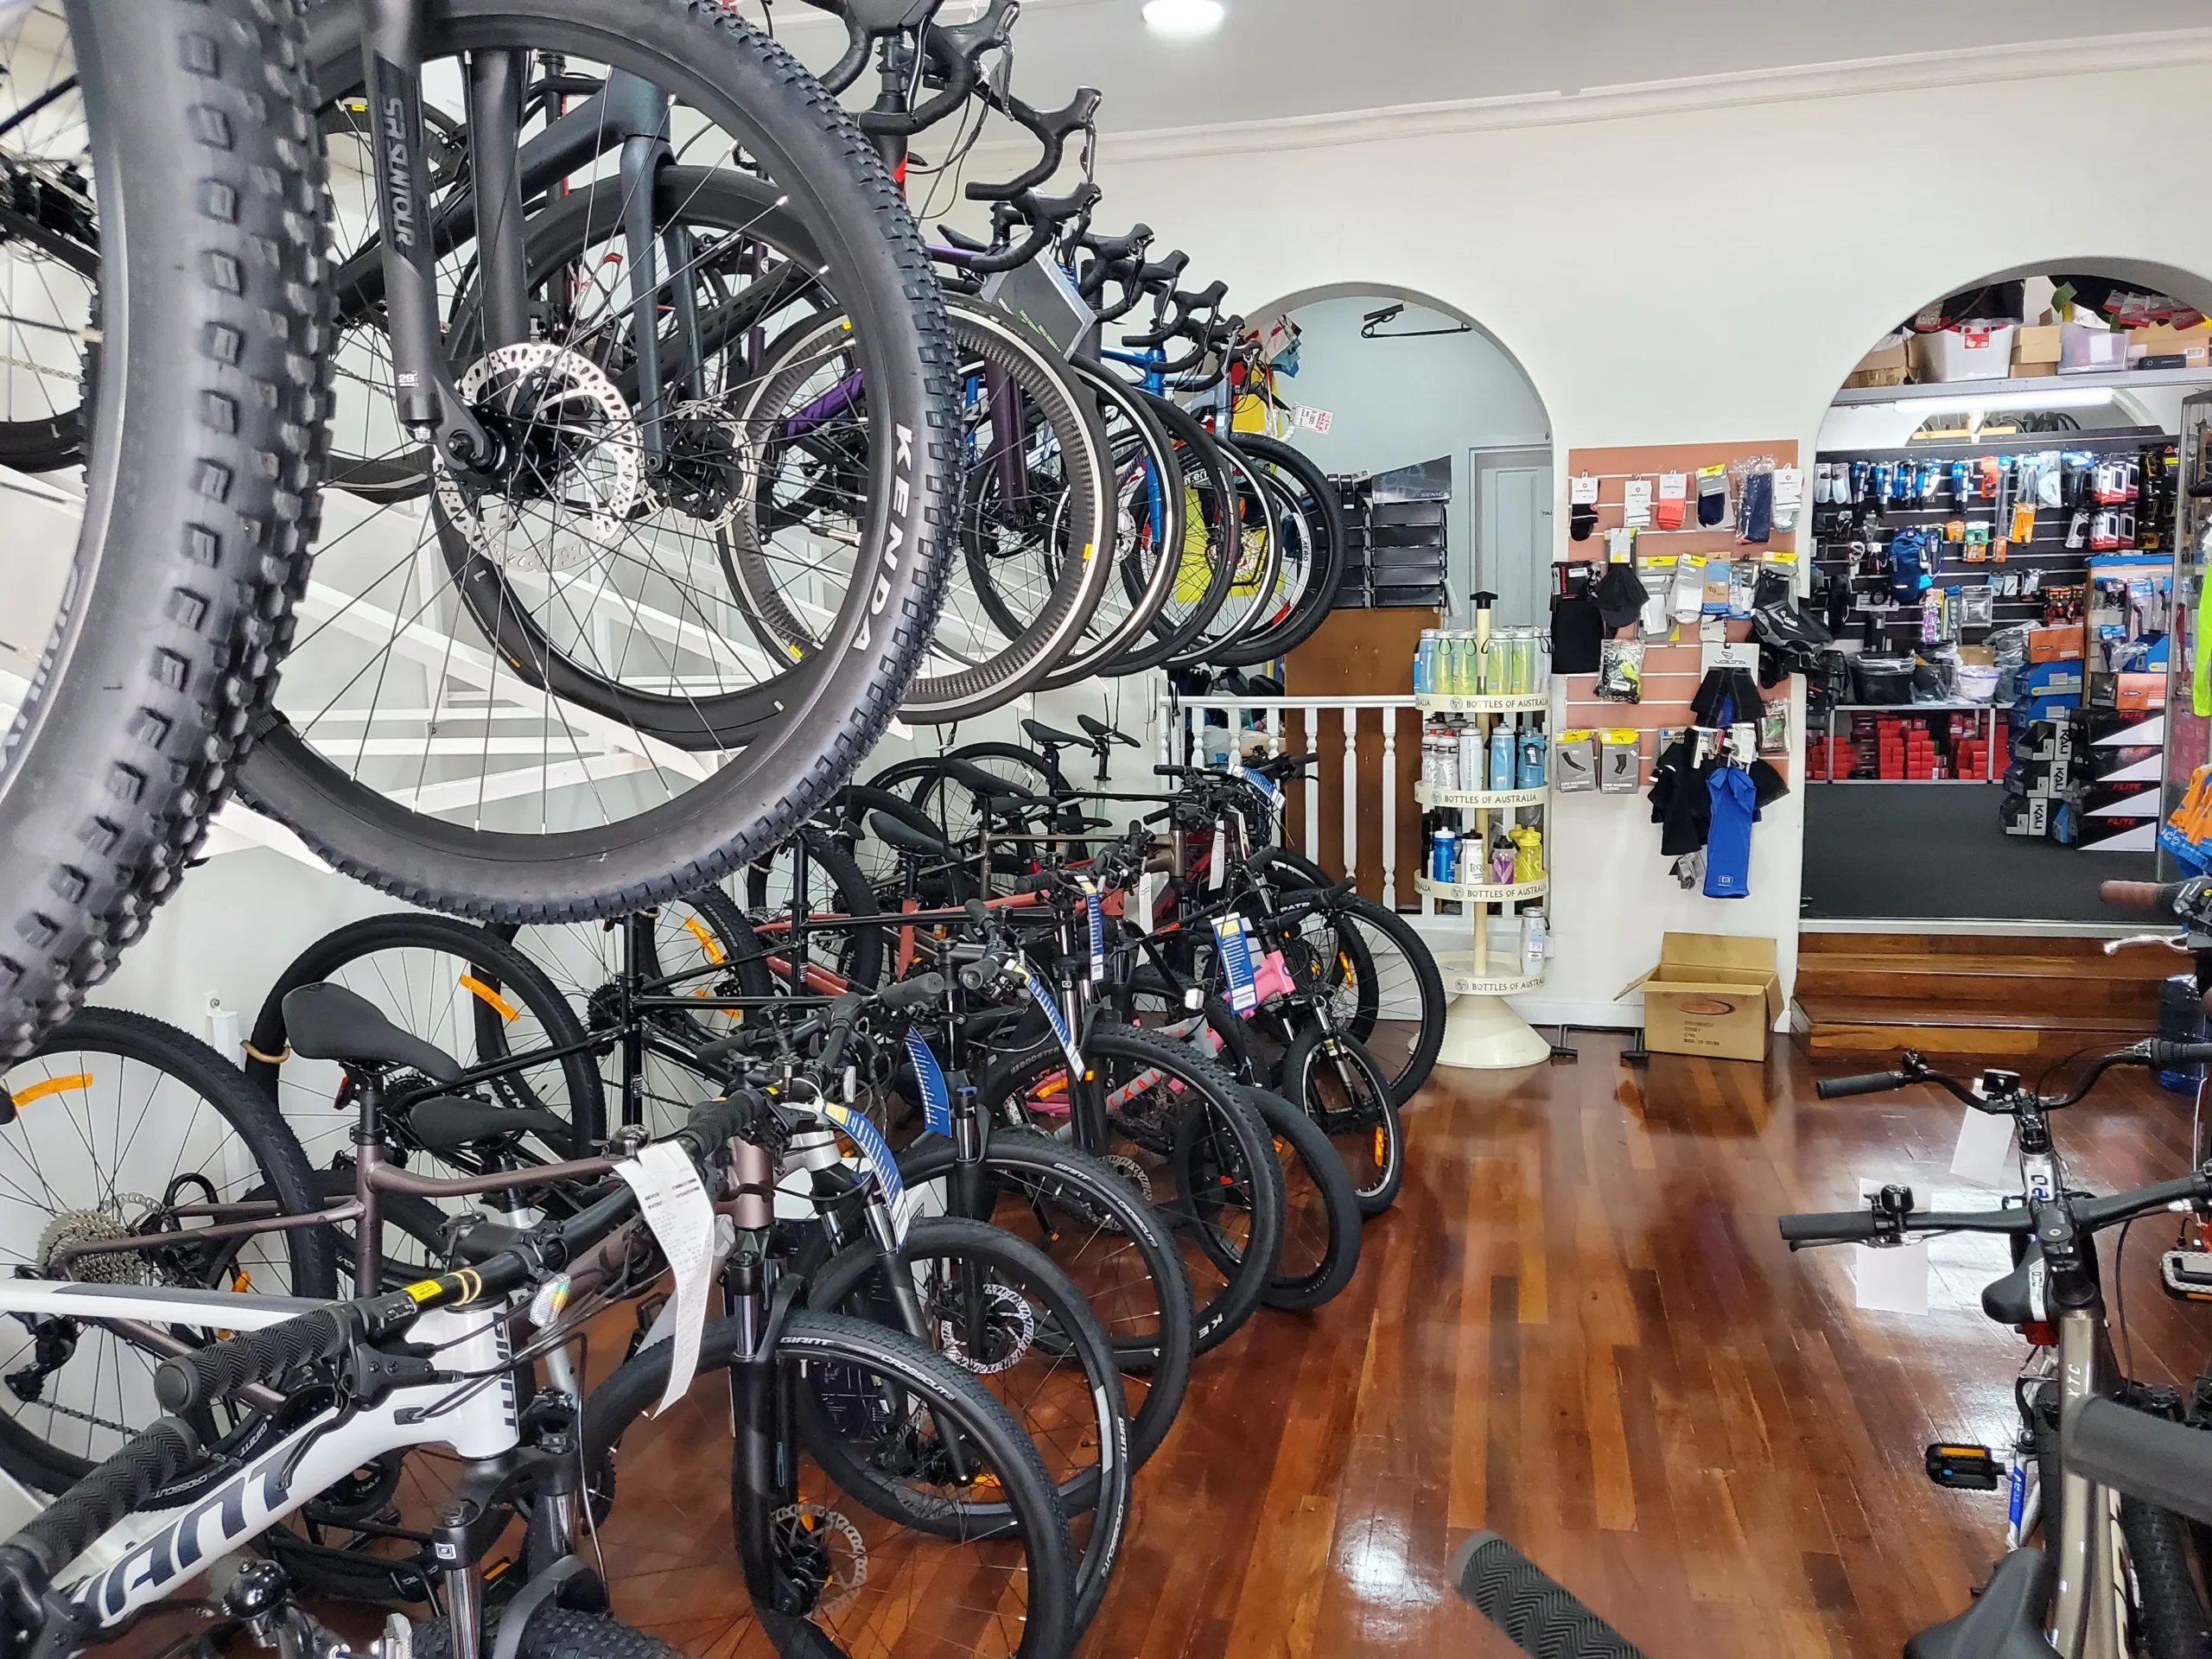 Cyclemania bike shop with a wide selection of bikes for sale, as well as bike parts and accessories.